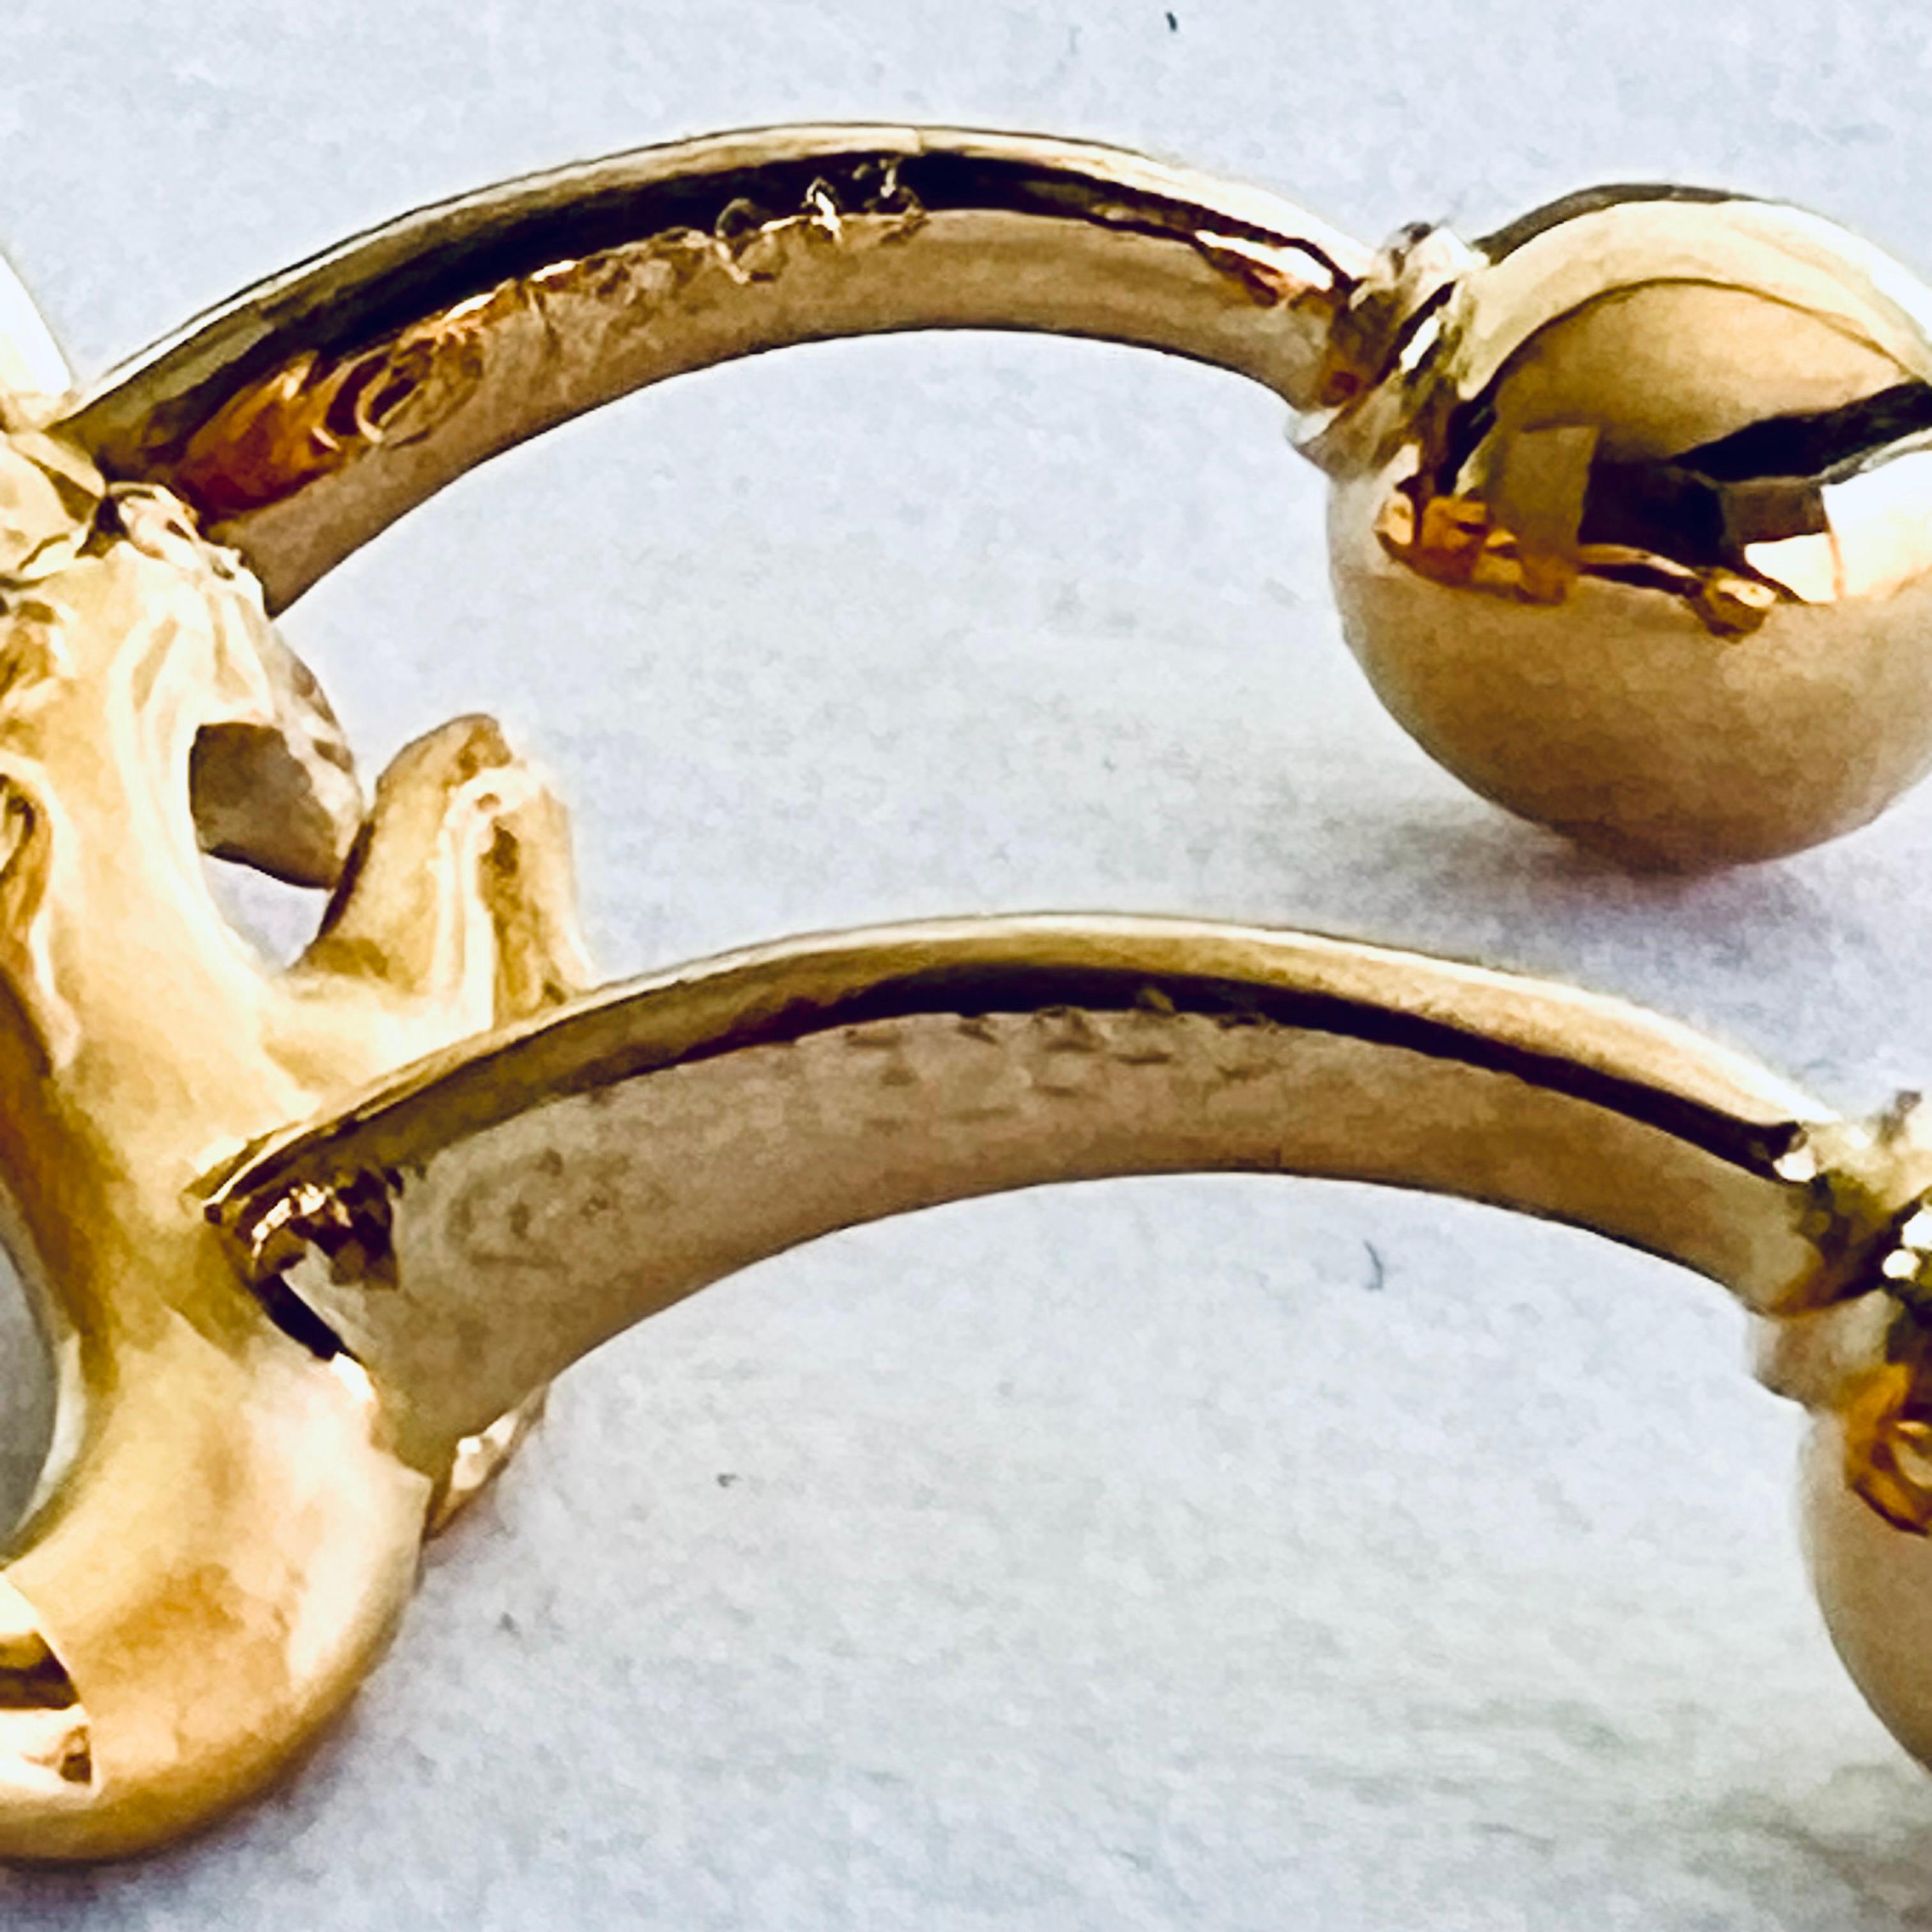 Carrera y Carrera Vintage 18 Karat Gold Leaping Horse 0.75 Inch Cufflinks 132643 For Sale 3